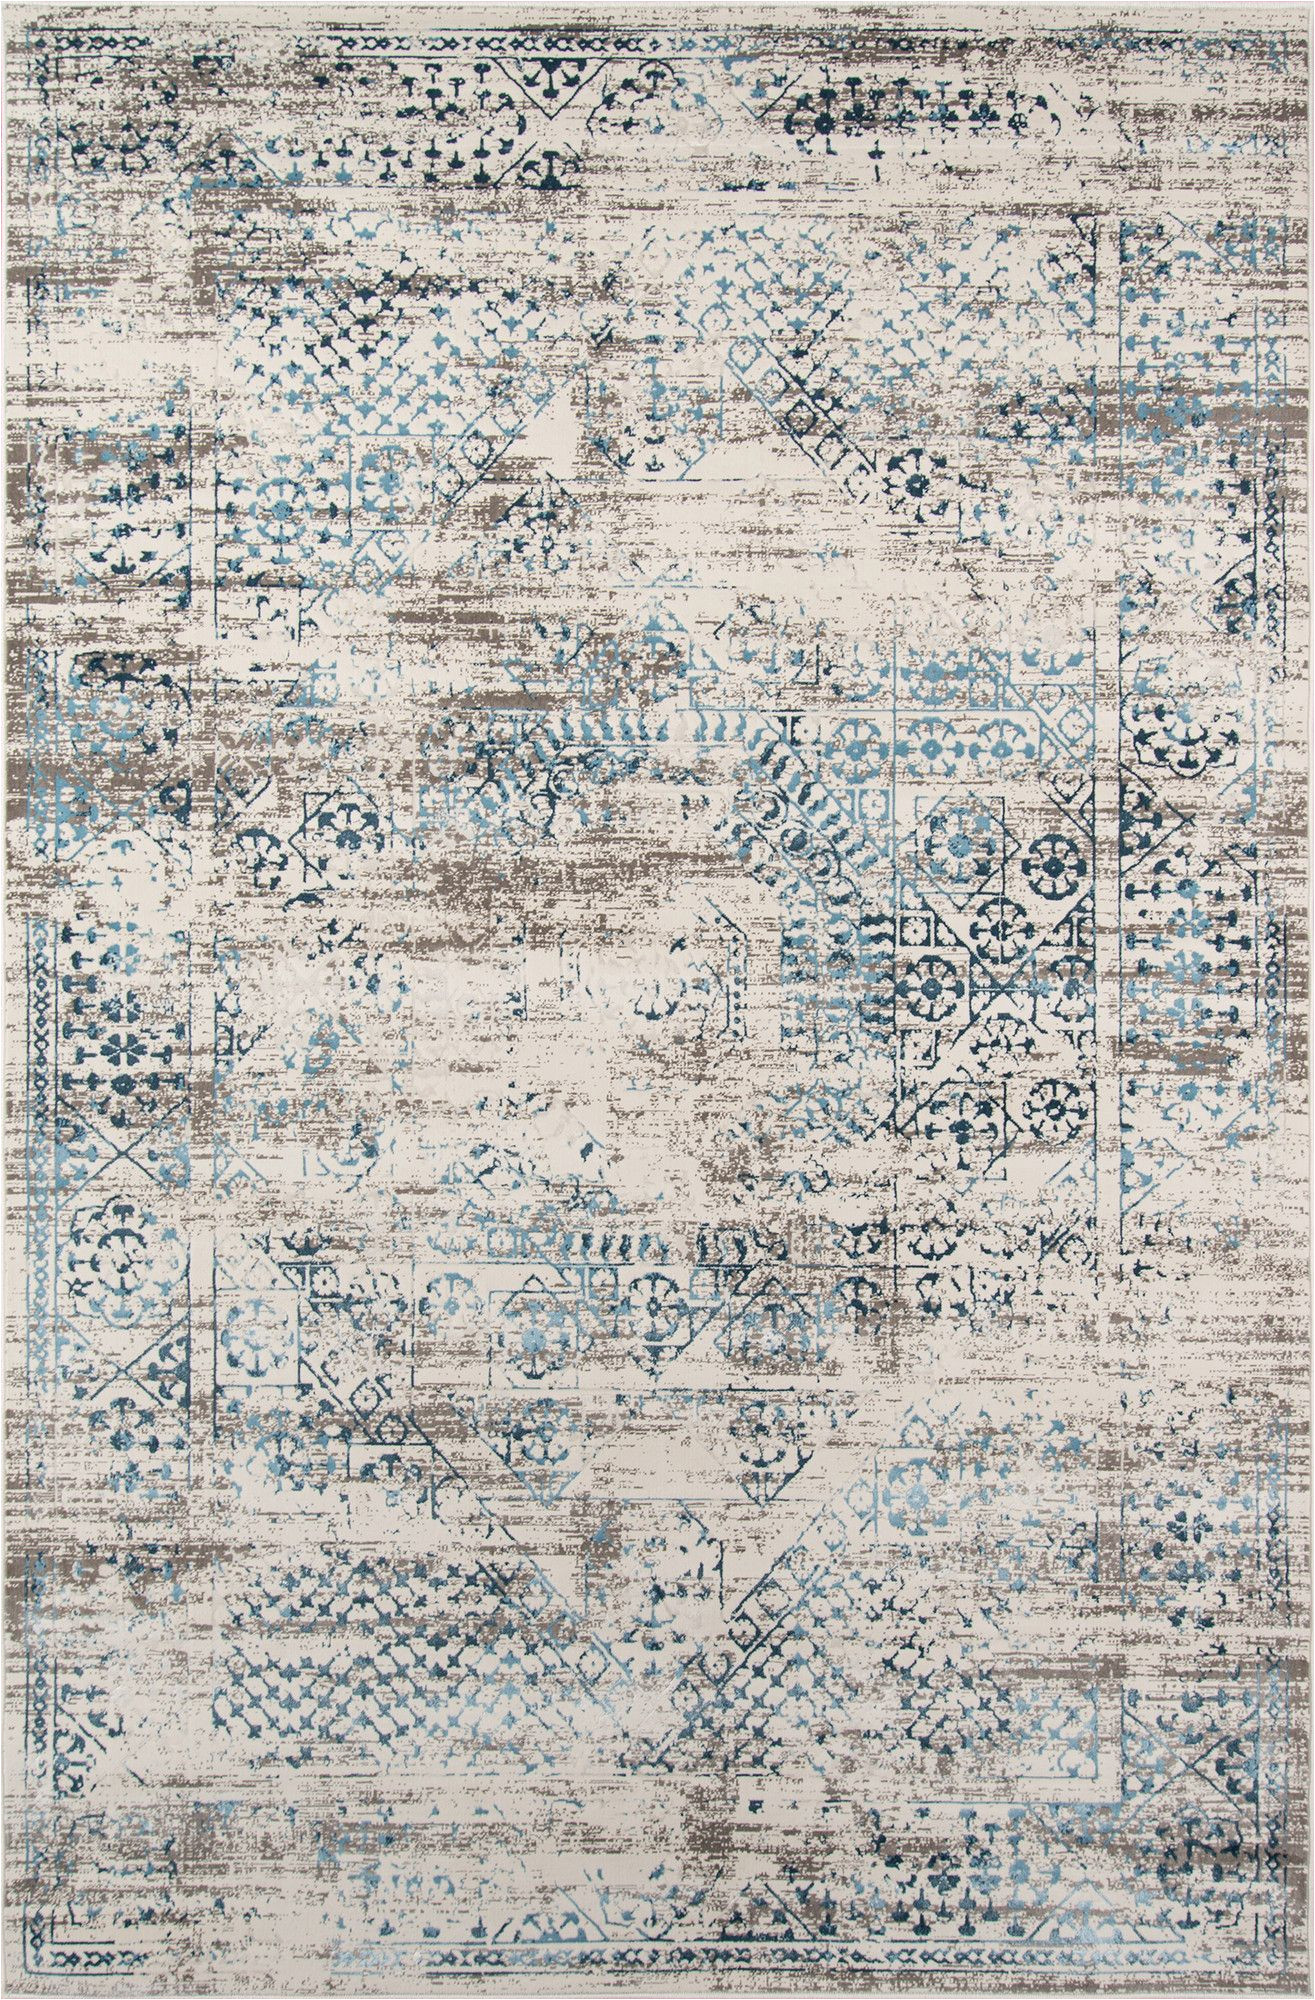 Hoagland Blue area Rug Hoagland Blue area Rug area Rugs Contemporary area Rugs